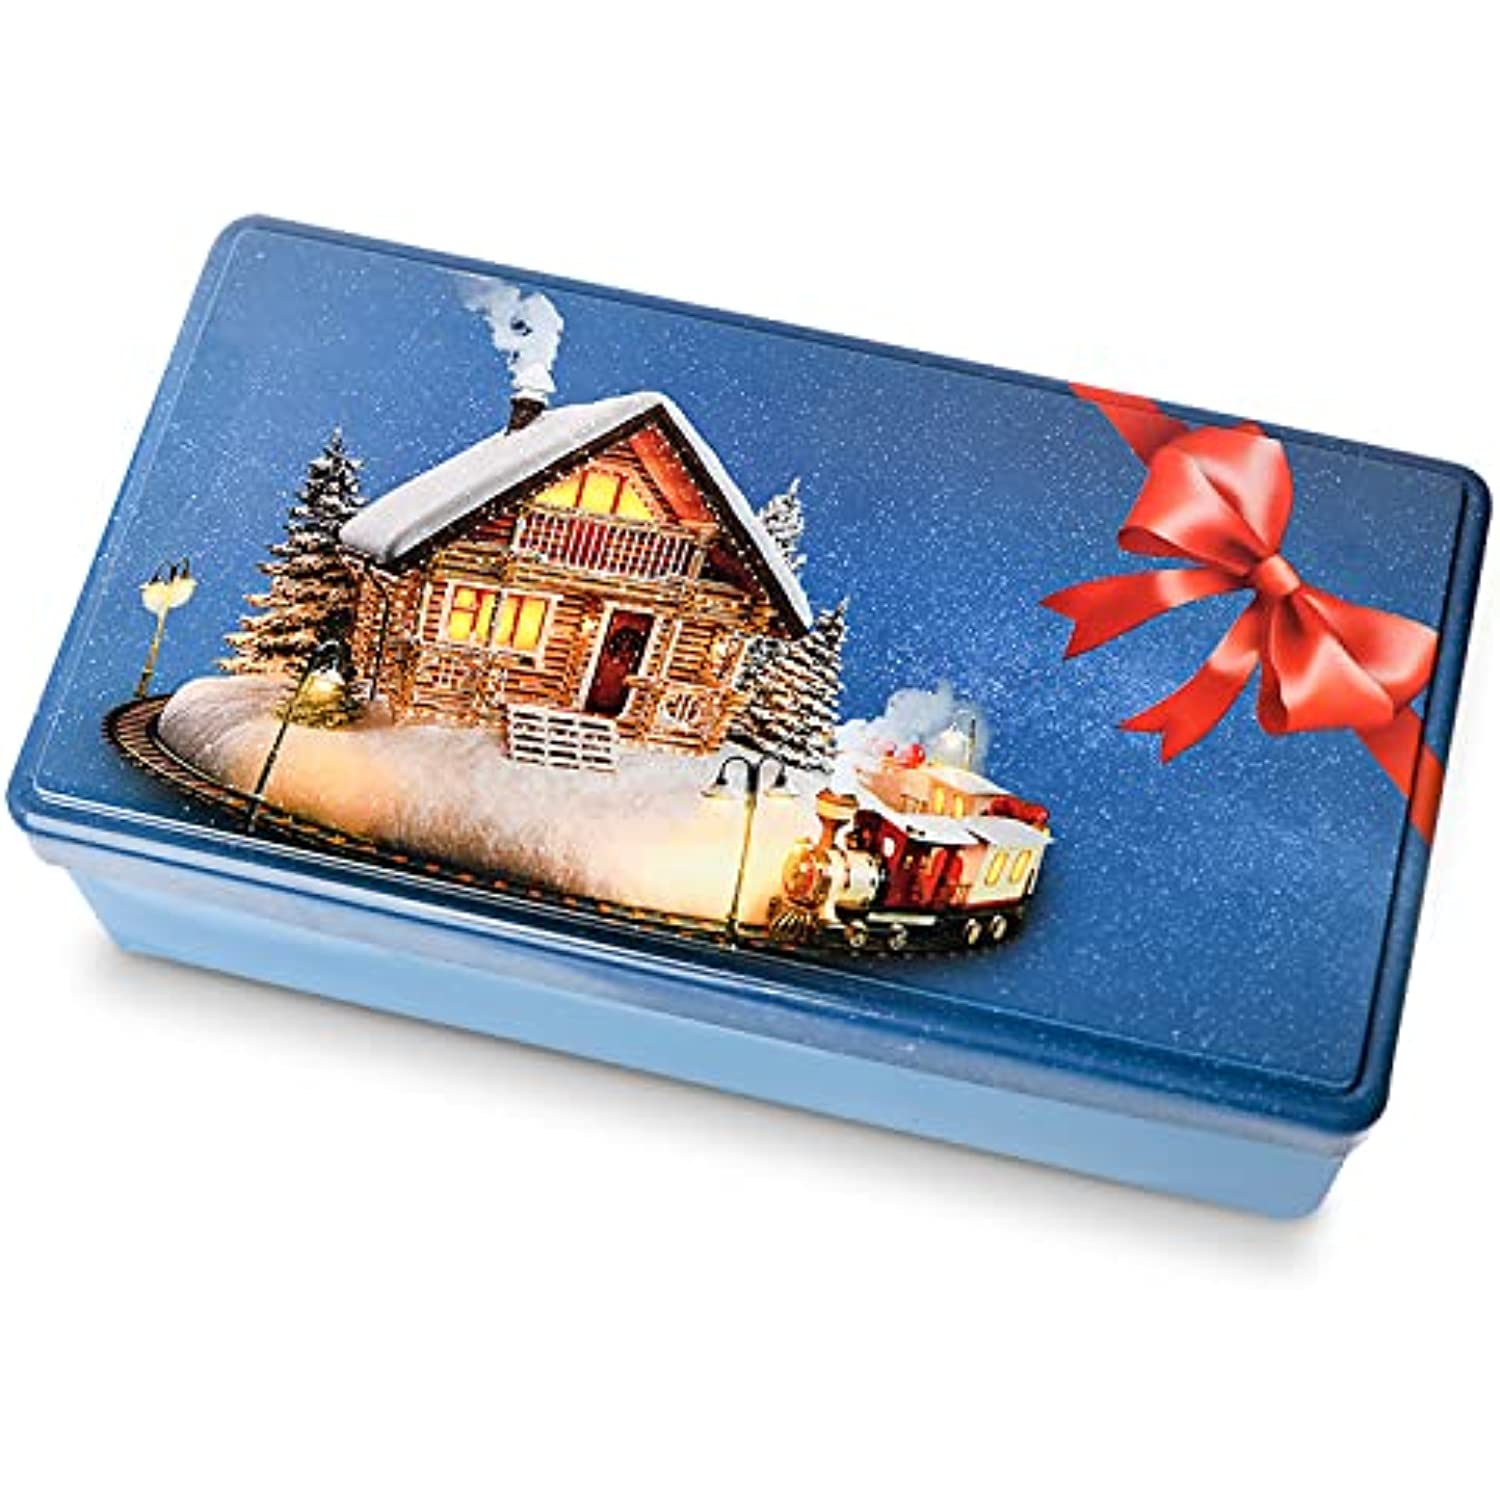 Crave Island Festive Tin Box - Metal Christmas Tins with Lids for Food, Candy, Cake, Cookies, Cards - Container with Decorative Winter Holiday Design - Supplies for Gift Giving, Storage, Decoration